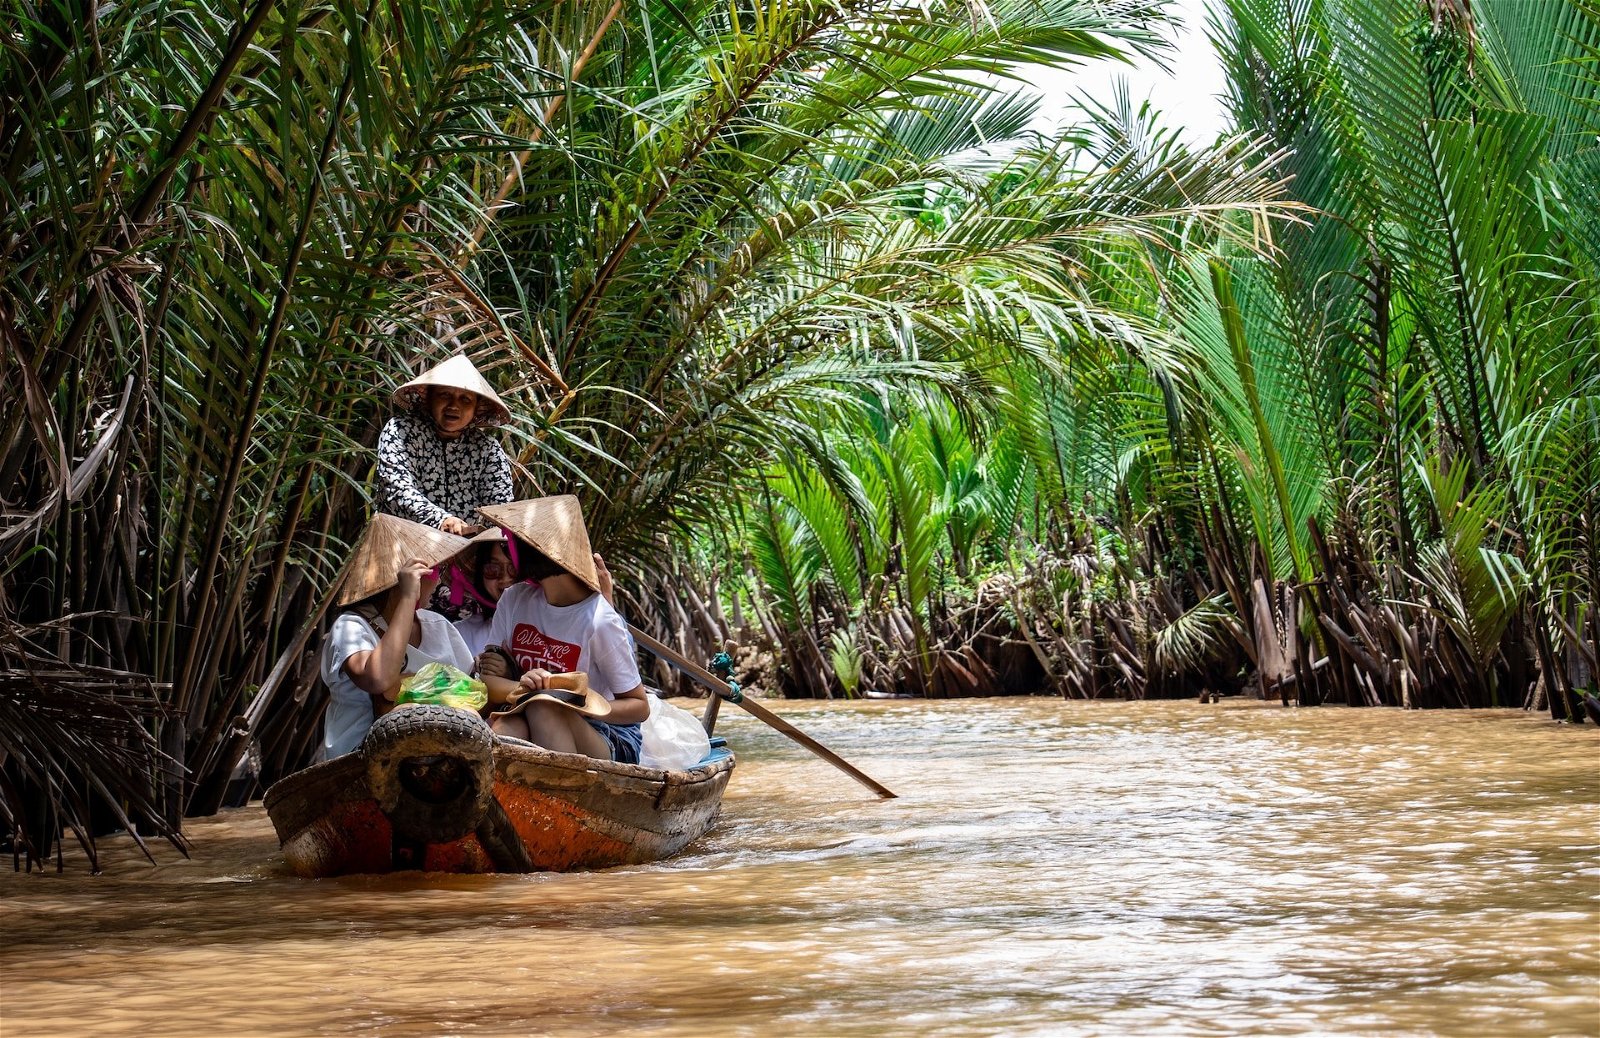 where to visit mekong delta